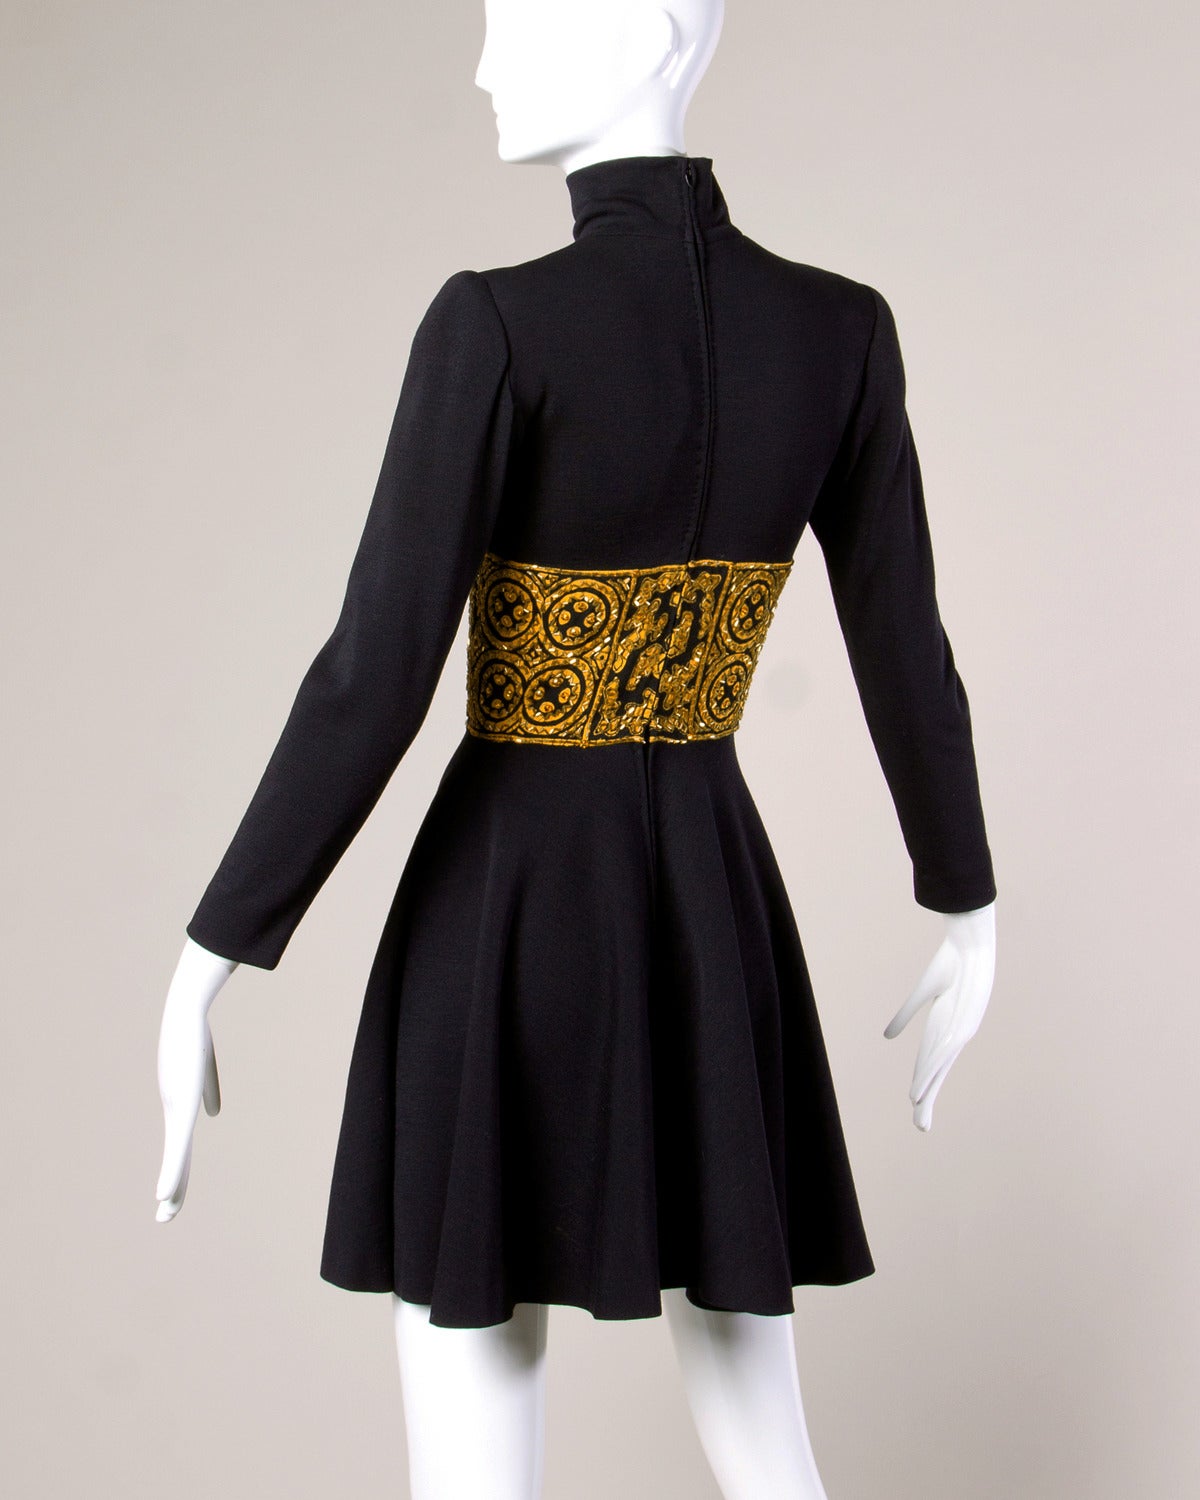 Pretty vintage black wool knit dress with an Asian-inspired gold beaded waistband, long sleeves, and high neck. 

Details:

Partially Lined
Rear Zip Closure
Small Structured Shoulder Pads
Marked Size: 4/ Small
Colors: Black/ Gold
Label: Bob